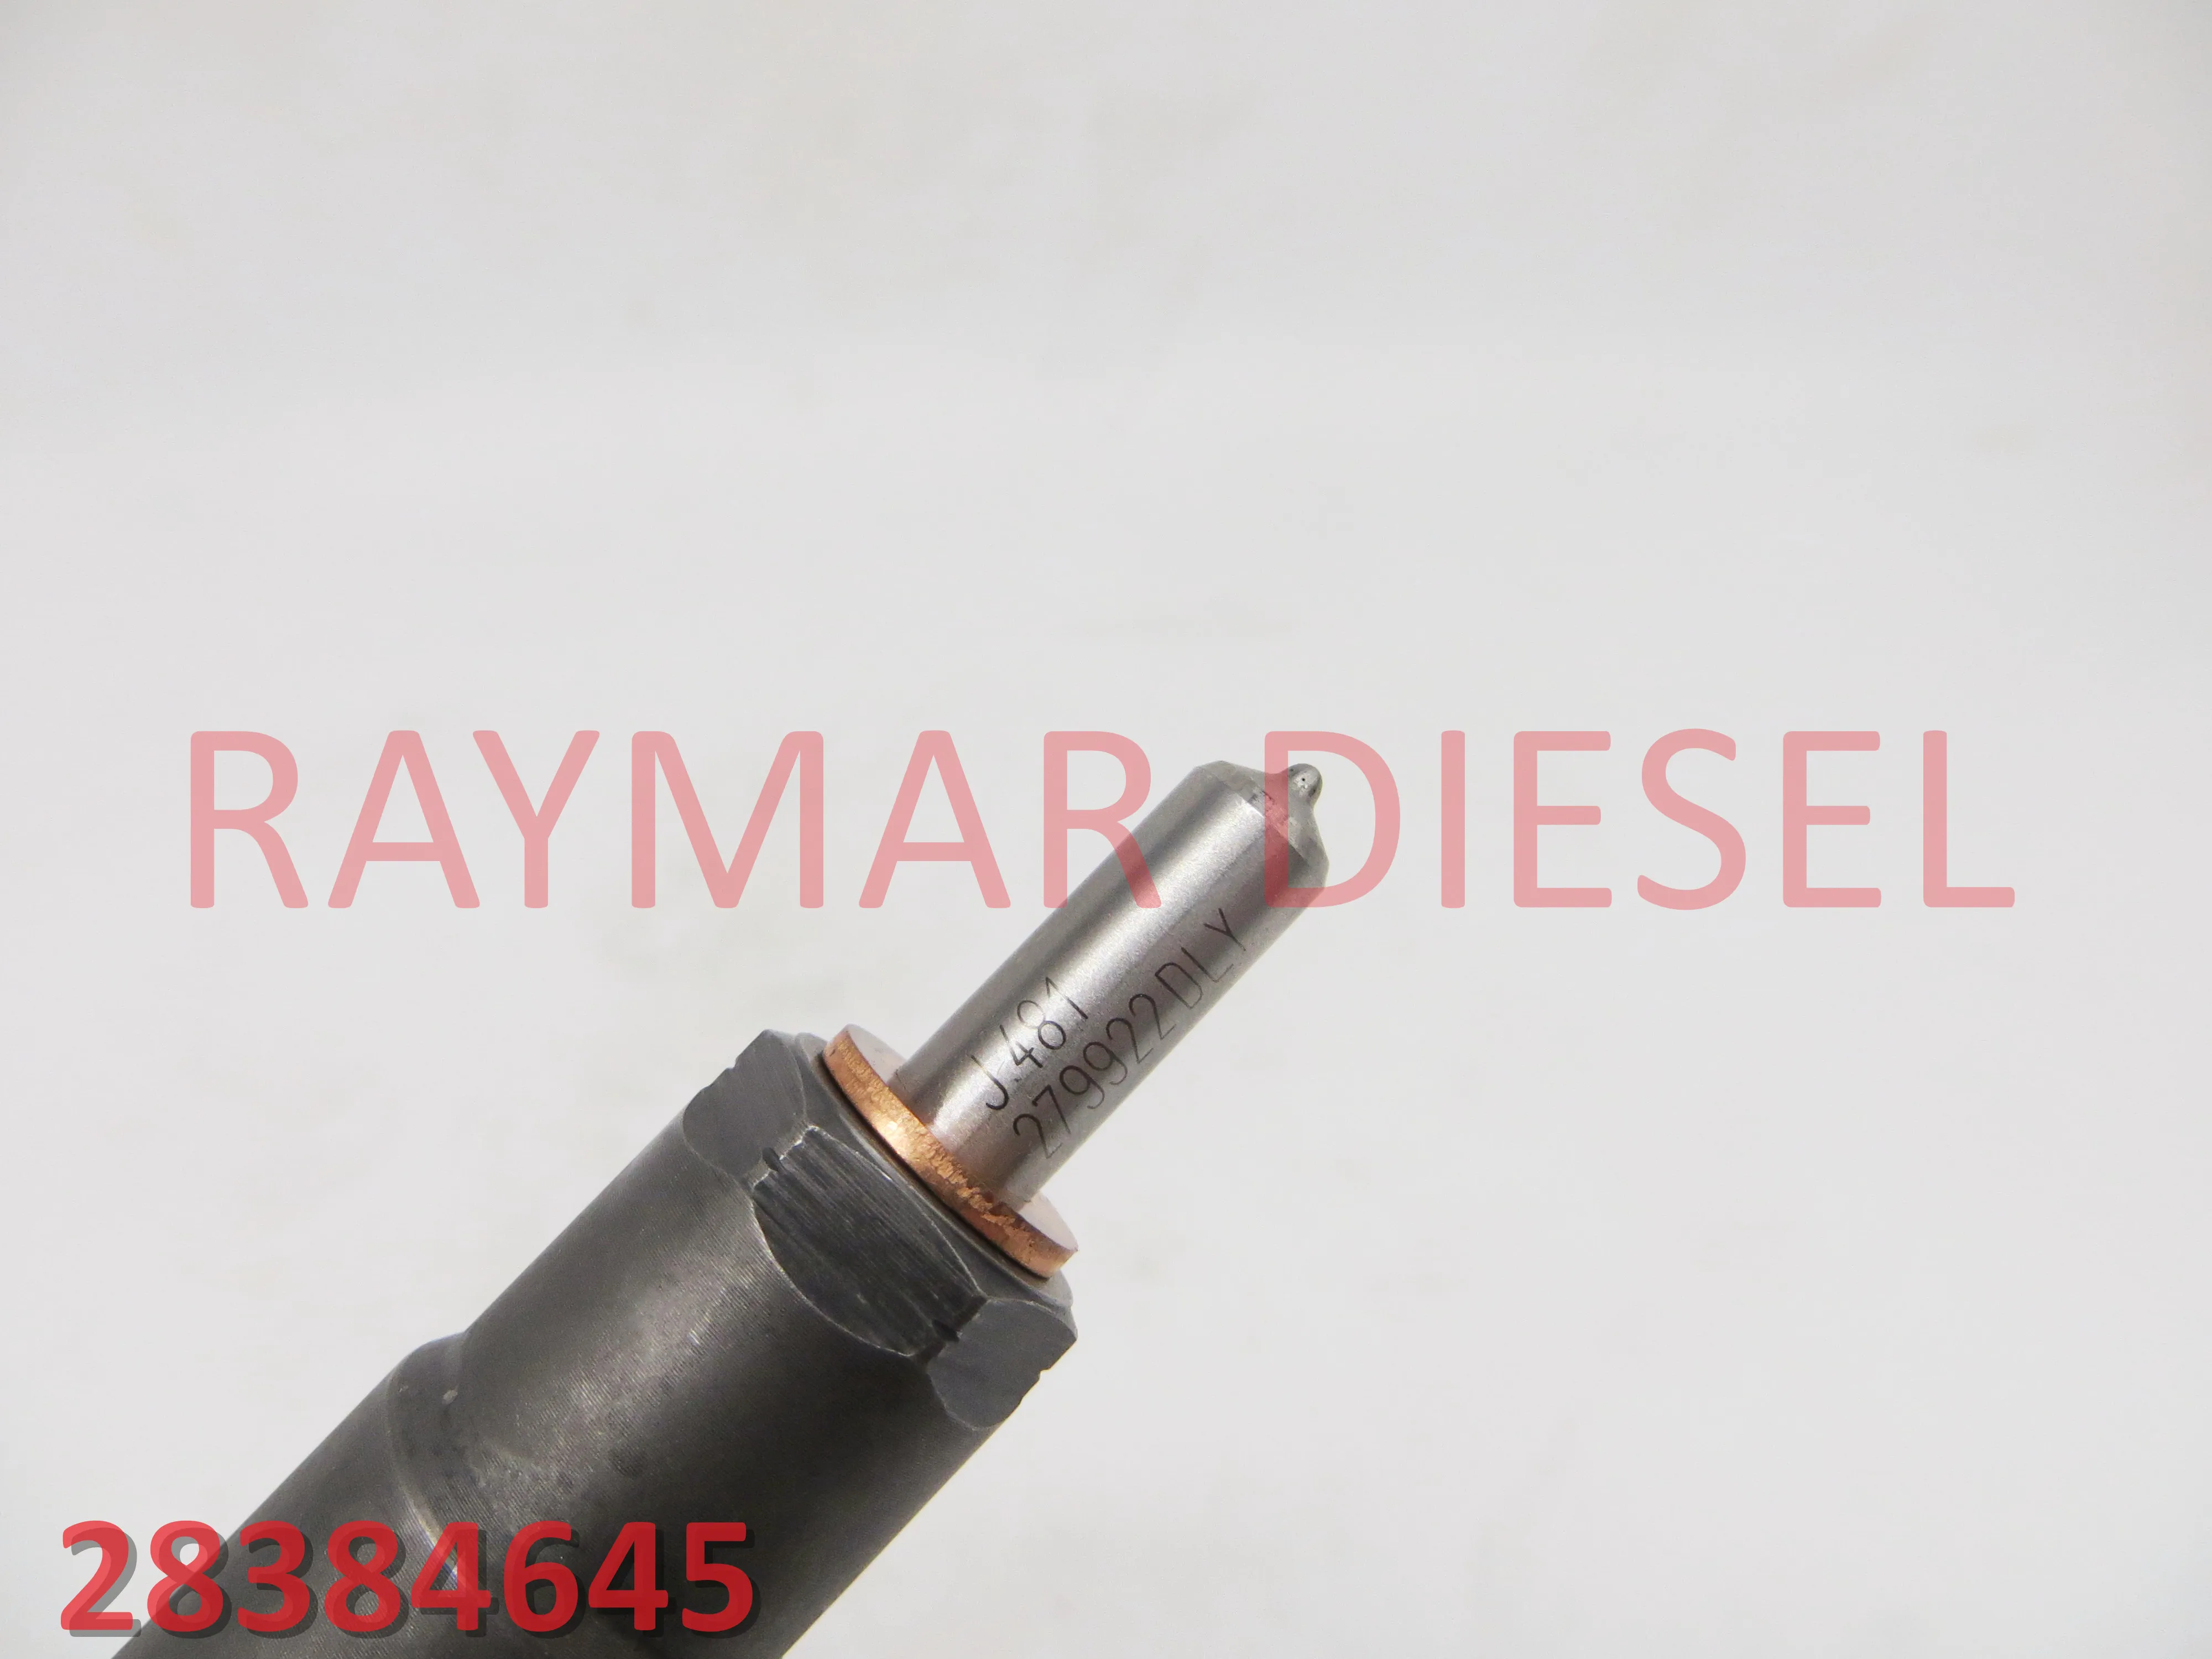 

Genuine common rail diesel fuel injector 28384645 for SSANGYONG D22 EURO 6 A6720170021, 6720170021